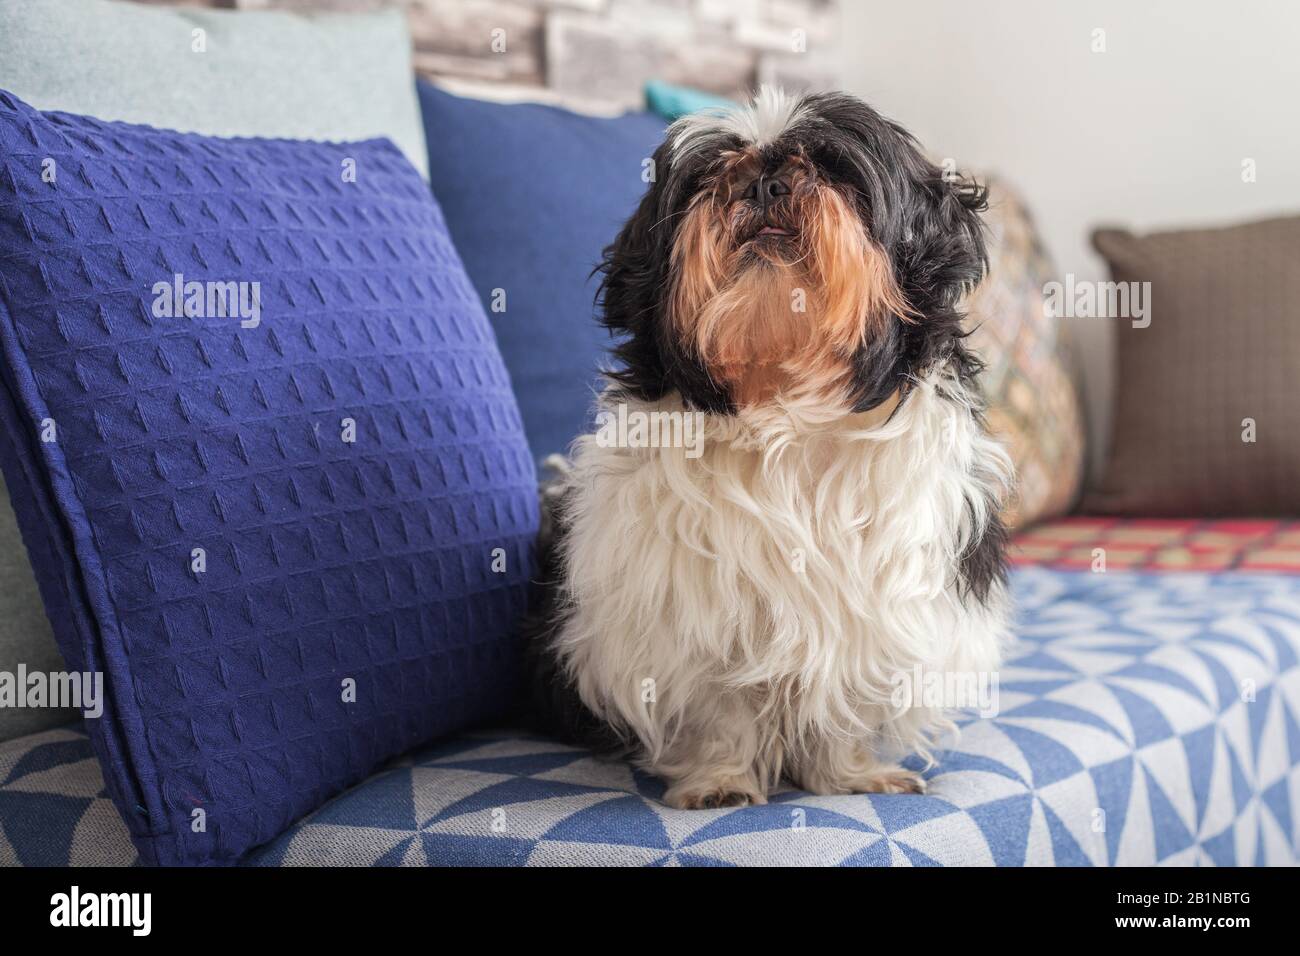 Funny dog is sitting at home on the couch. Shih Tzu breed. pet. Homeliness. Stock Photo